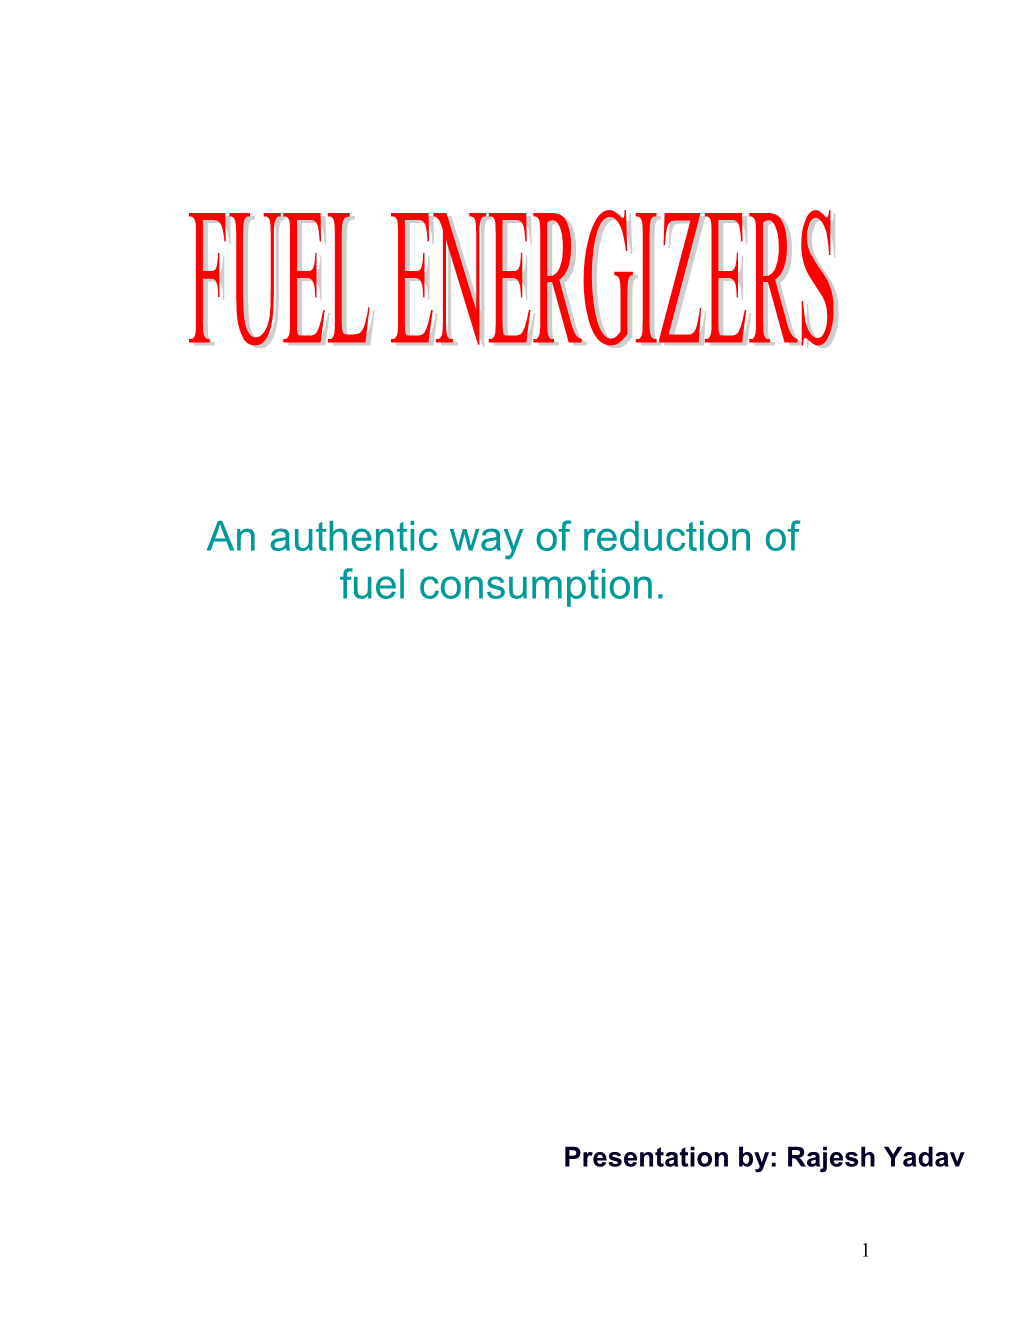 In This Era of Increasing Fuel Prices, Here a Device Called FUEL ENERGIZER Help Us to Reduce